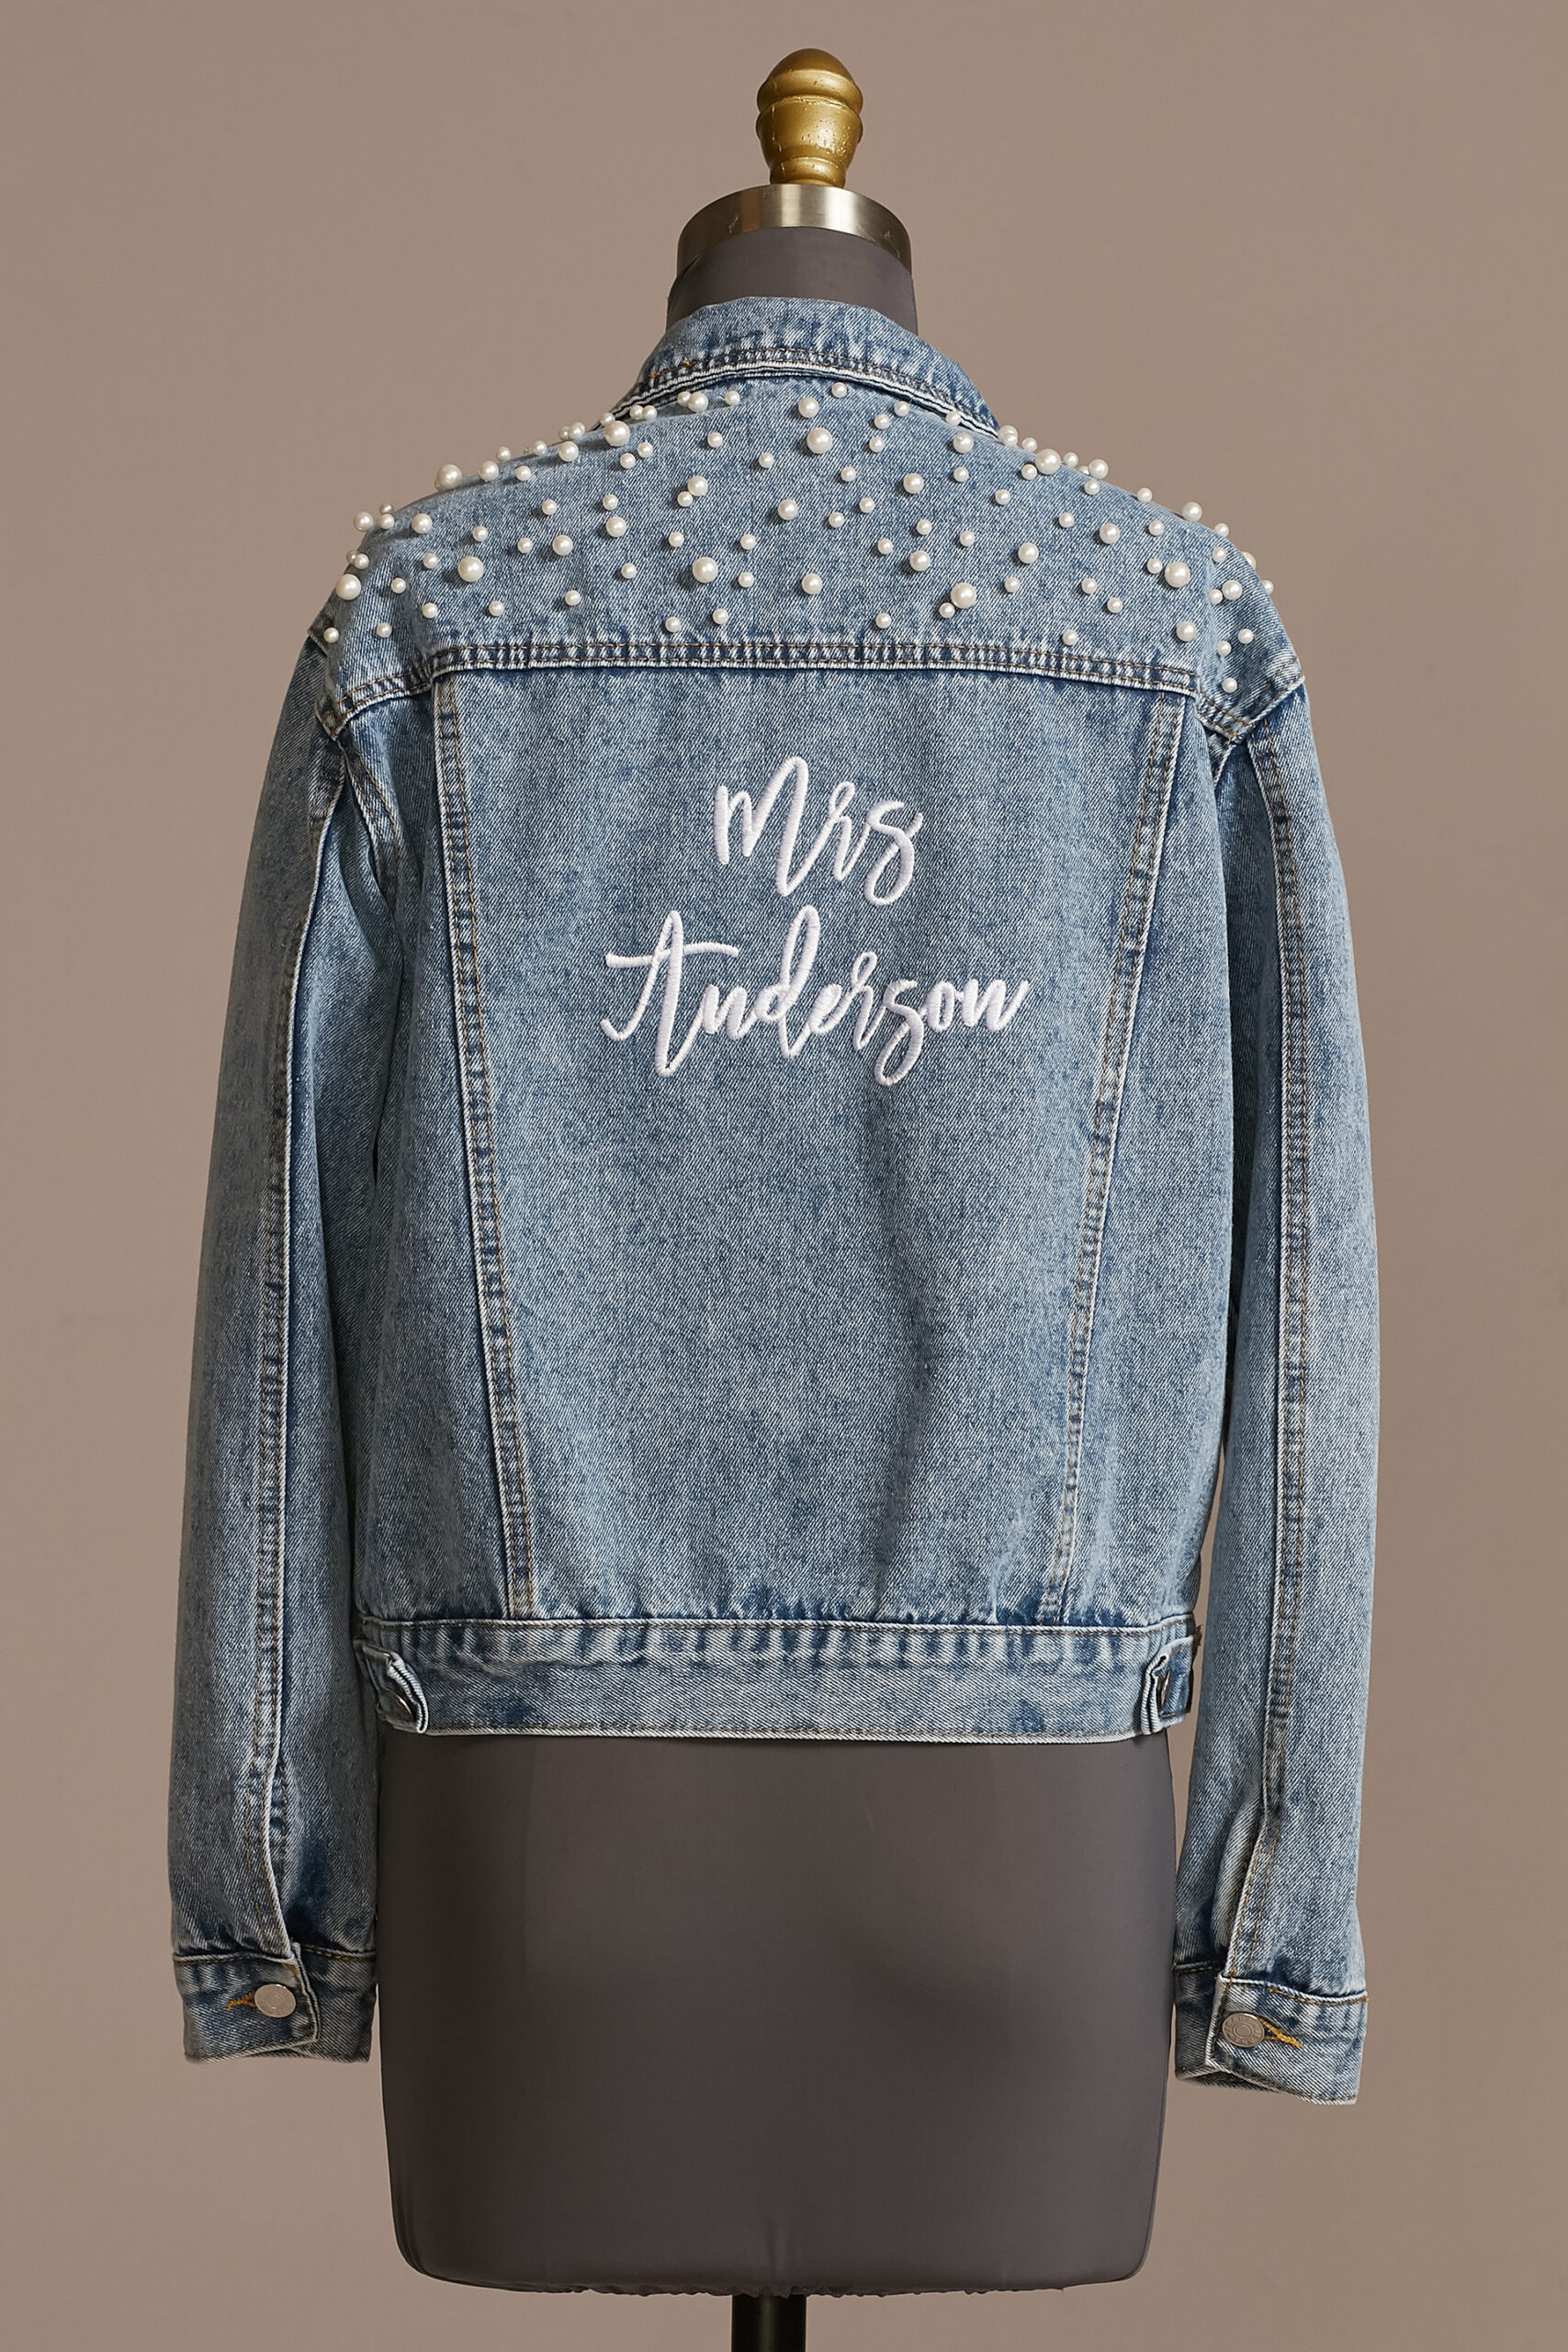 This personalized denim jacket is a unique accessory for the bride.